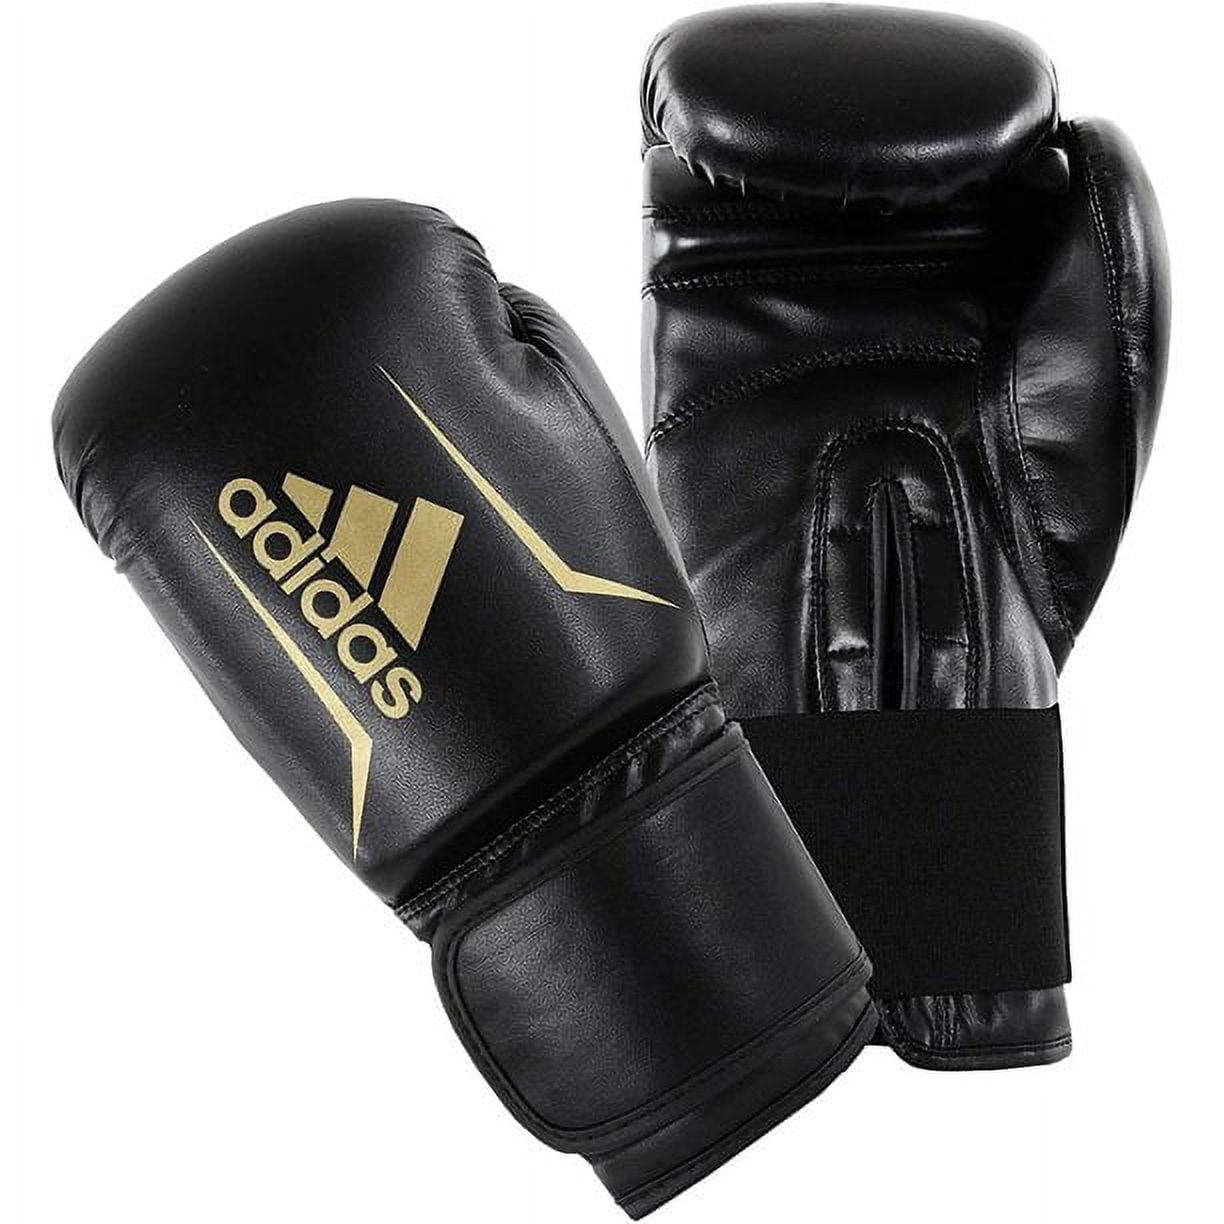 Bags. Sparring, Kickboxing Boxing for Fitness 3.0 and White,Gold 50 Heavy Speed Women Light Training, for and FLX Men Gym, & Gloves 10oz Punching, adidas